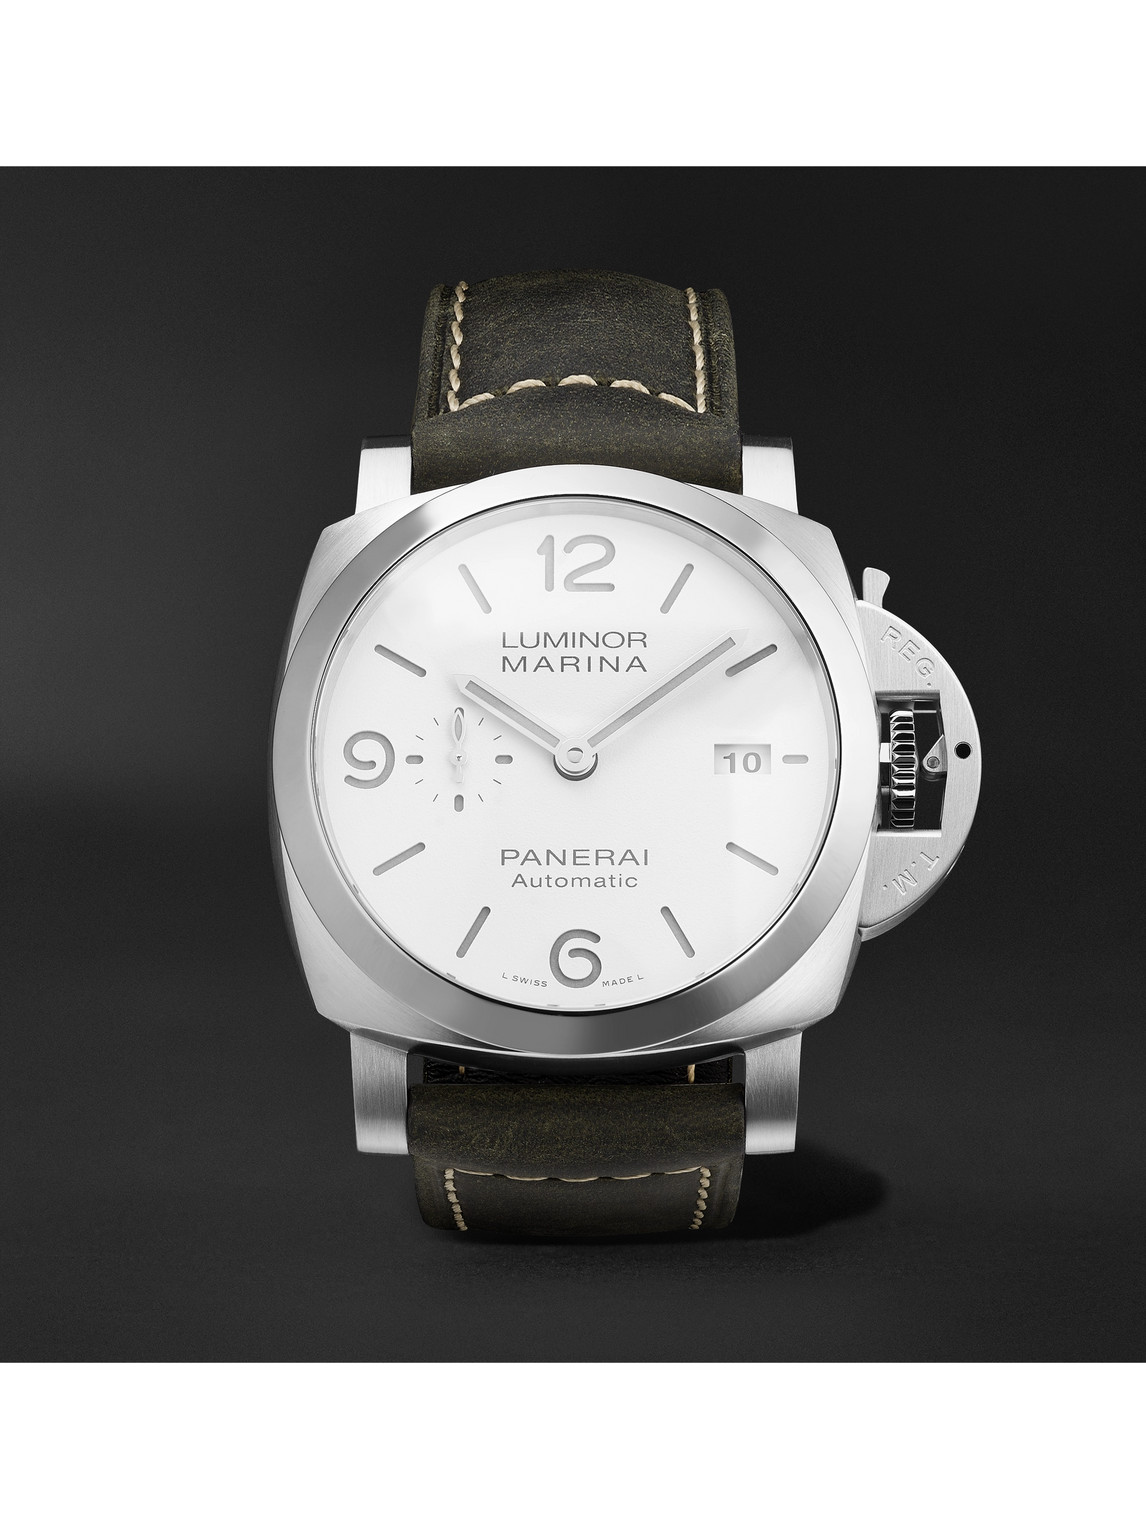 Panerai Luminor Marina Automatic 44mm Stainless Steel And Leather Watch, Ref. No. Pam01314 In White